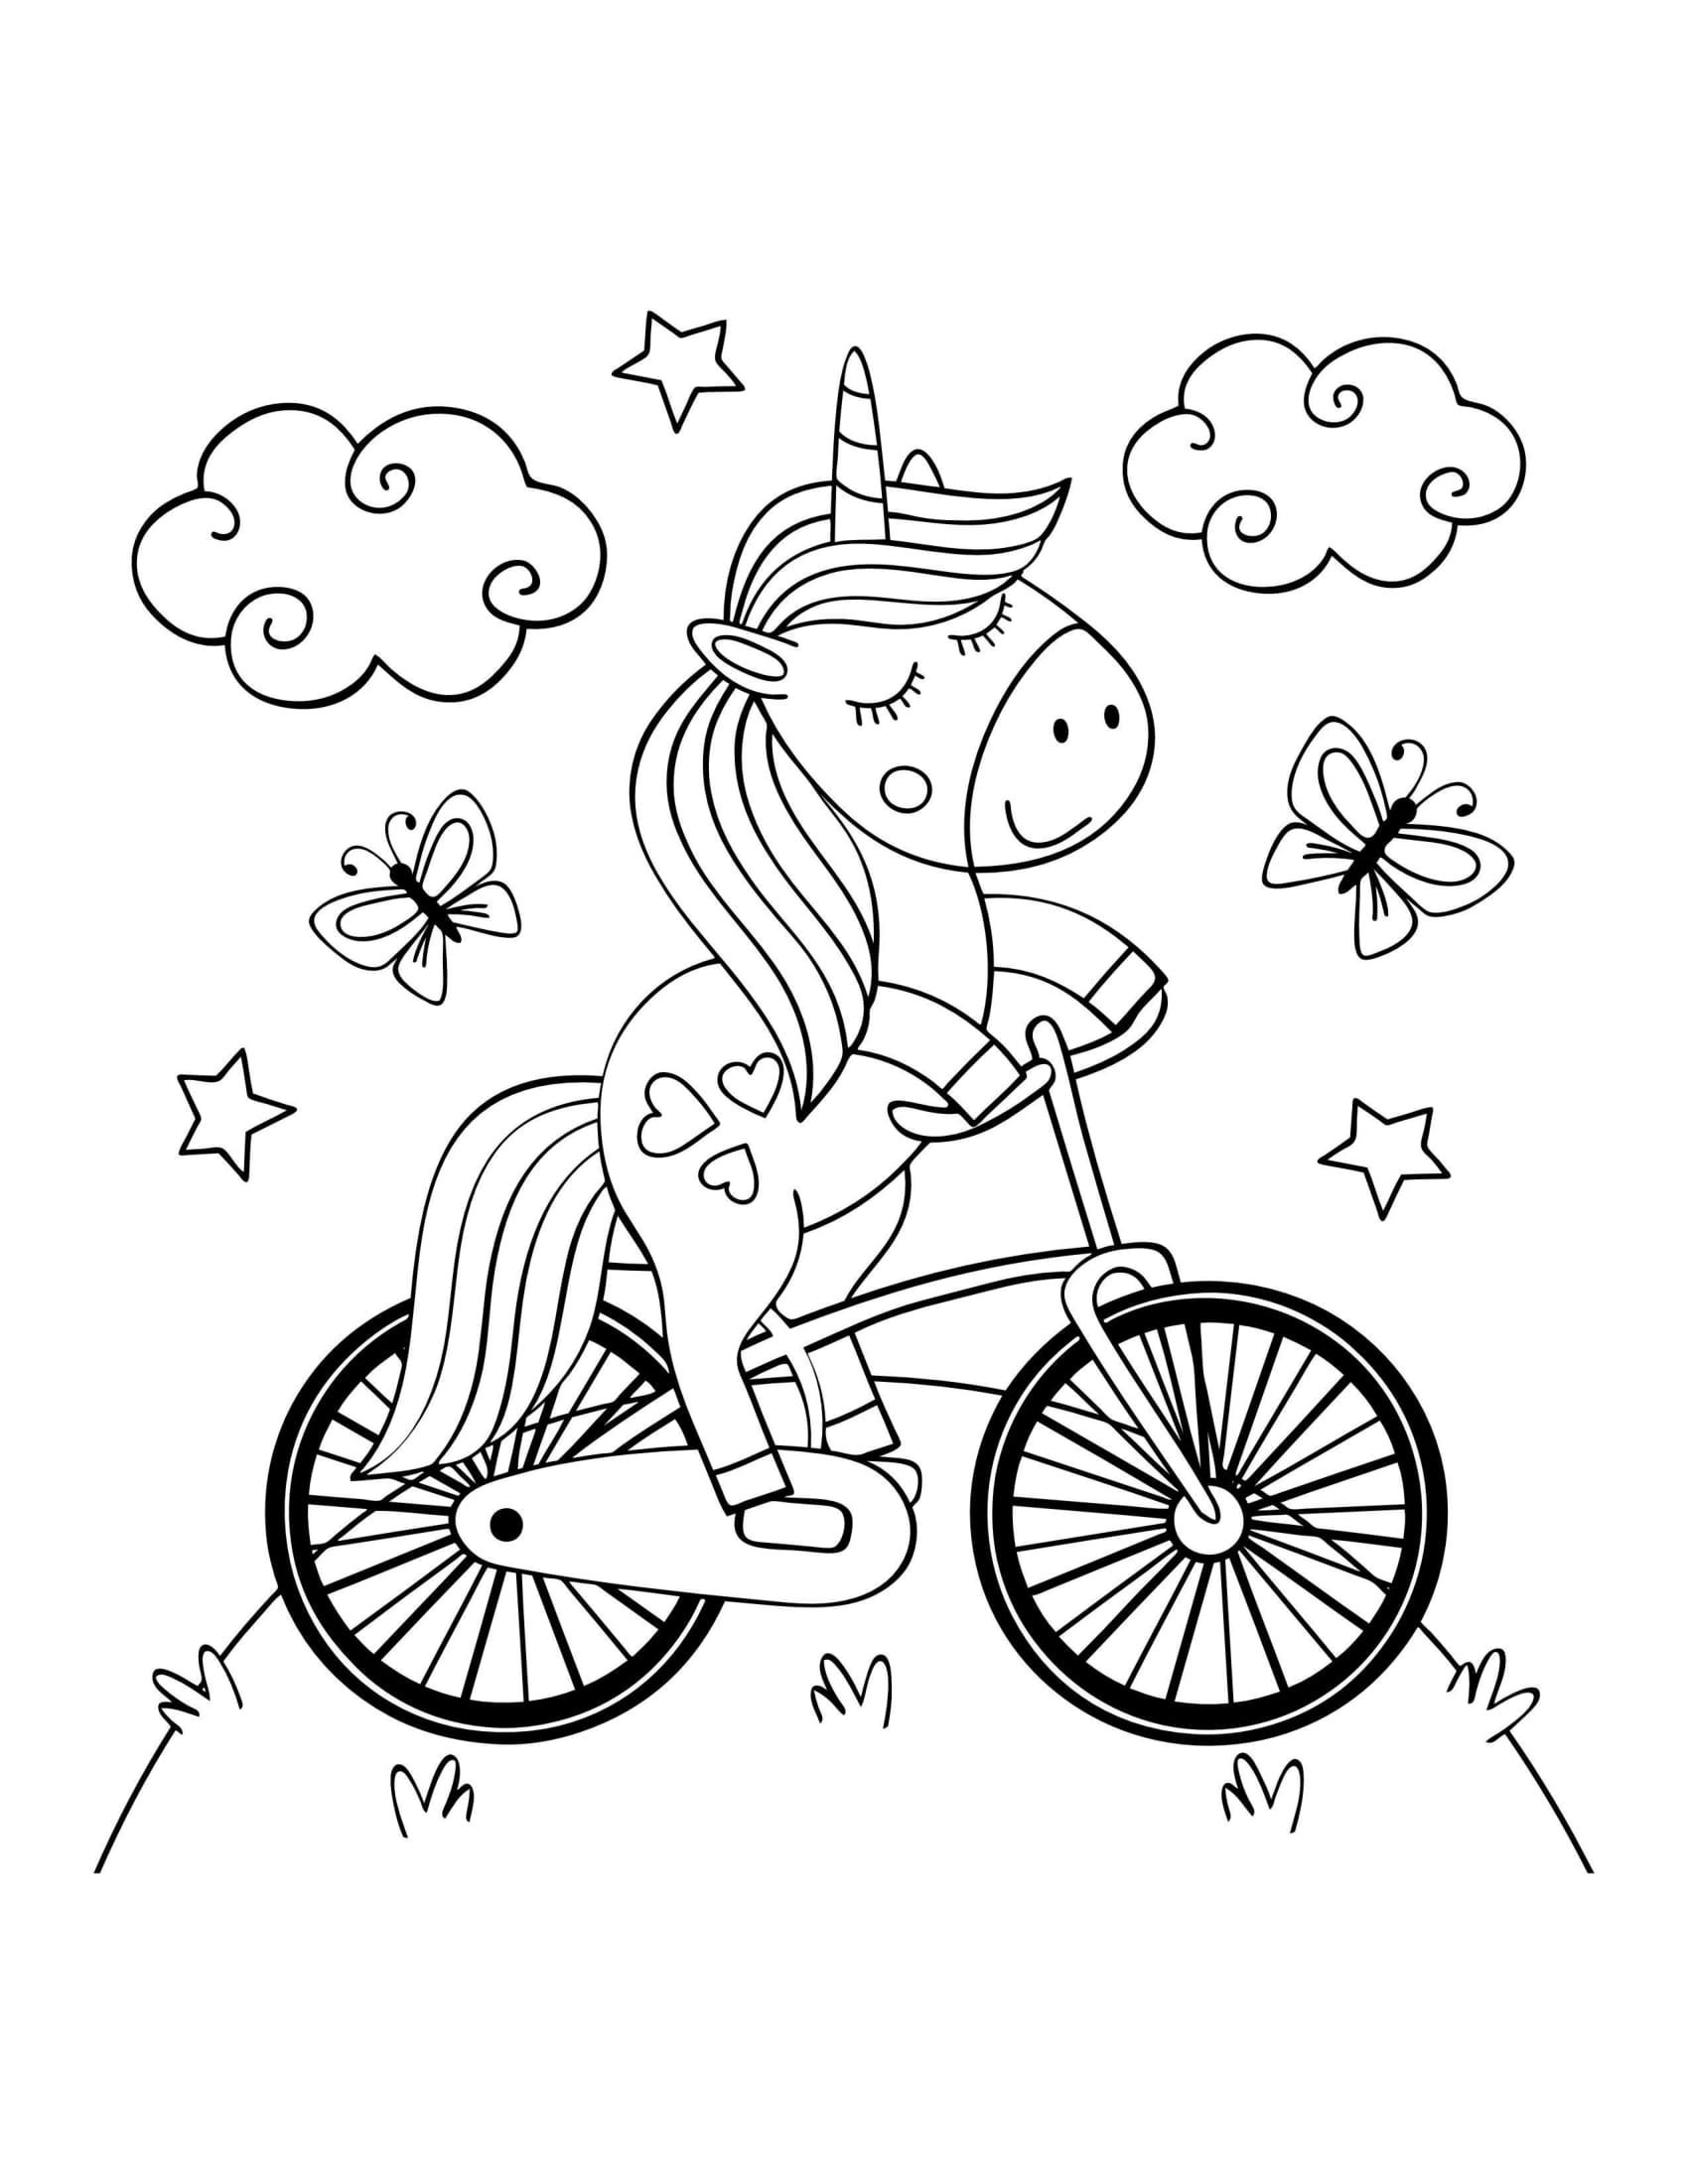 Unicorn riding a bicycle coloring page